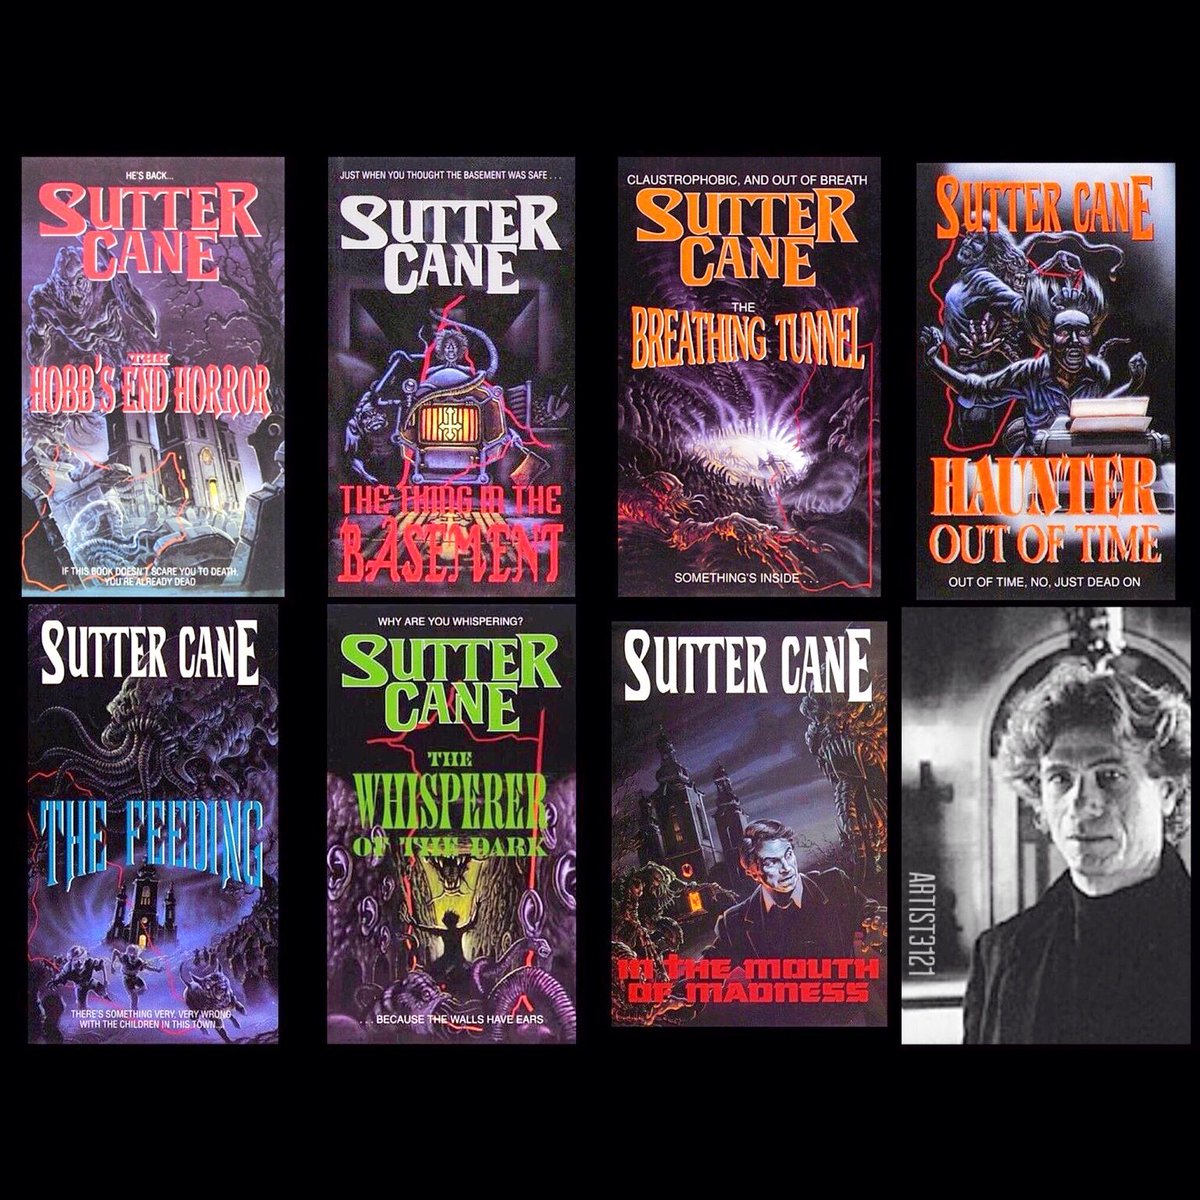 R. J. Crowther Jr. on Twitter: "@Y3ll0wZlgN I'd love to see a bunch of our current luminaries write a series of Sutter Cane Presents type pulp novels with '80s-style covers. @